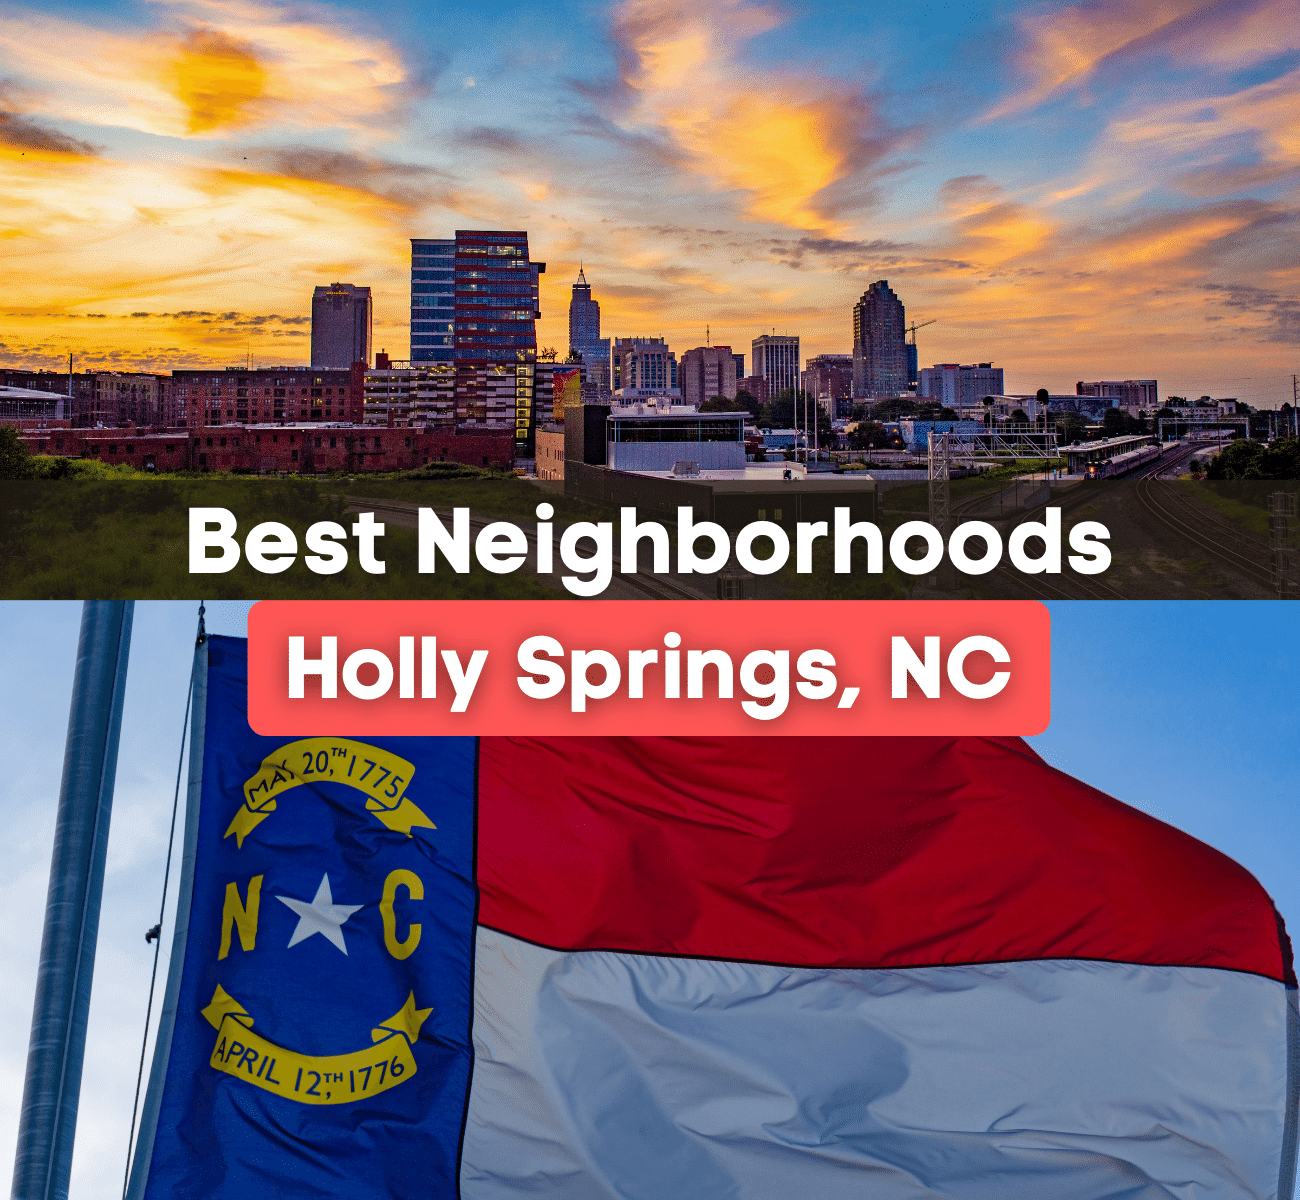 Best Neighborhoods in Holly Springs NC - The best places to live in Holly Springs